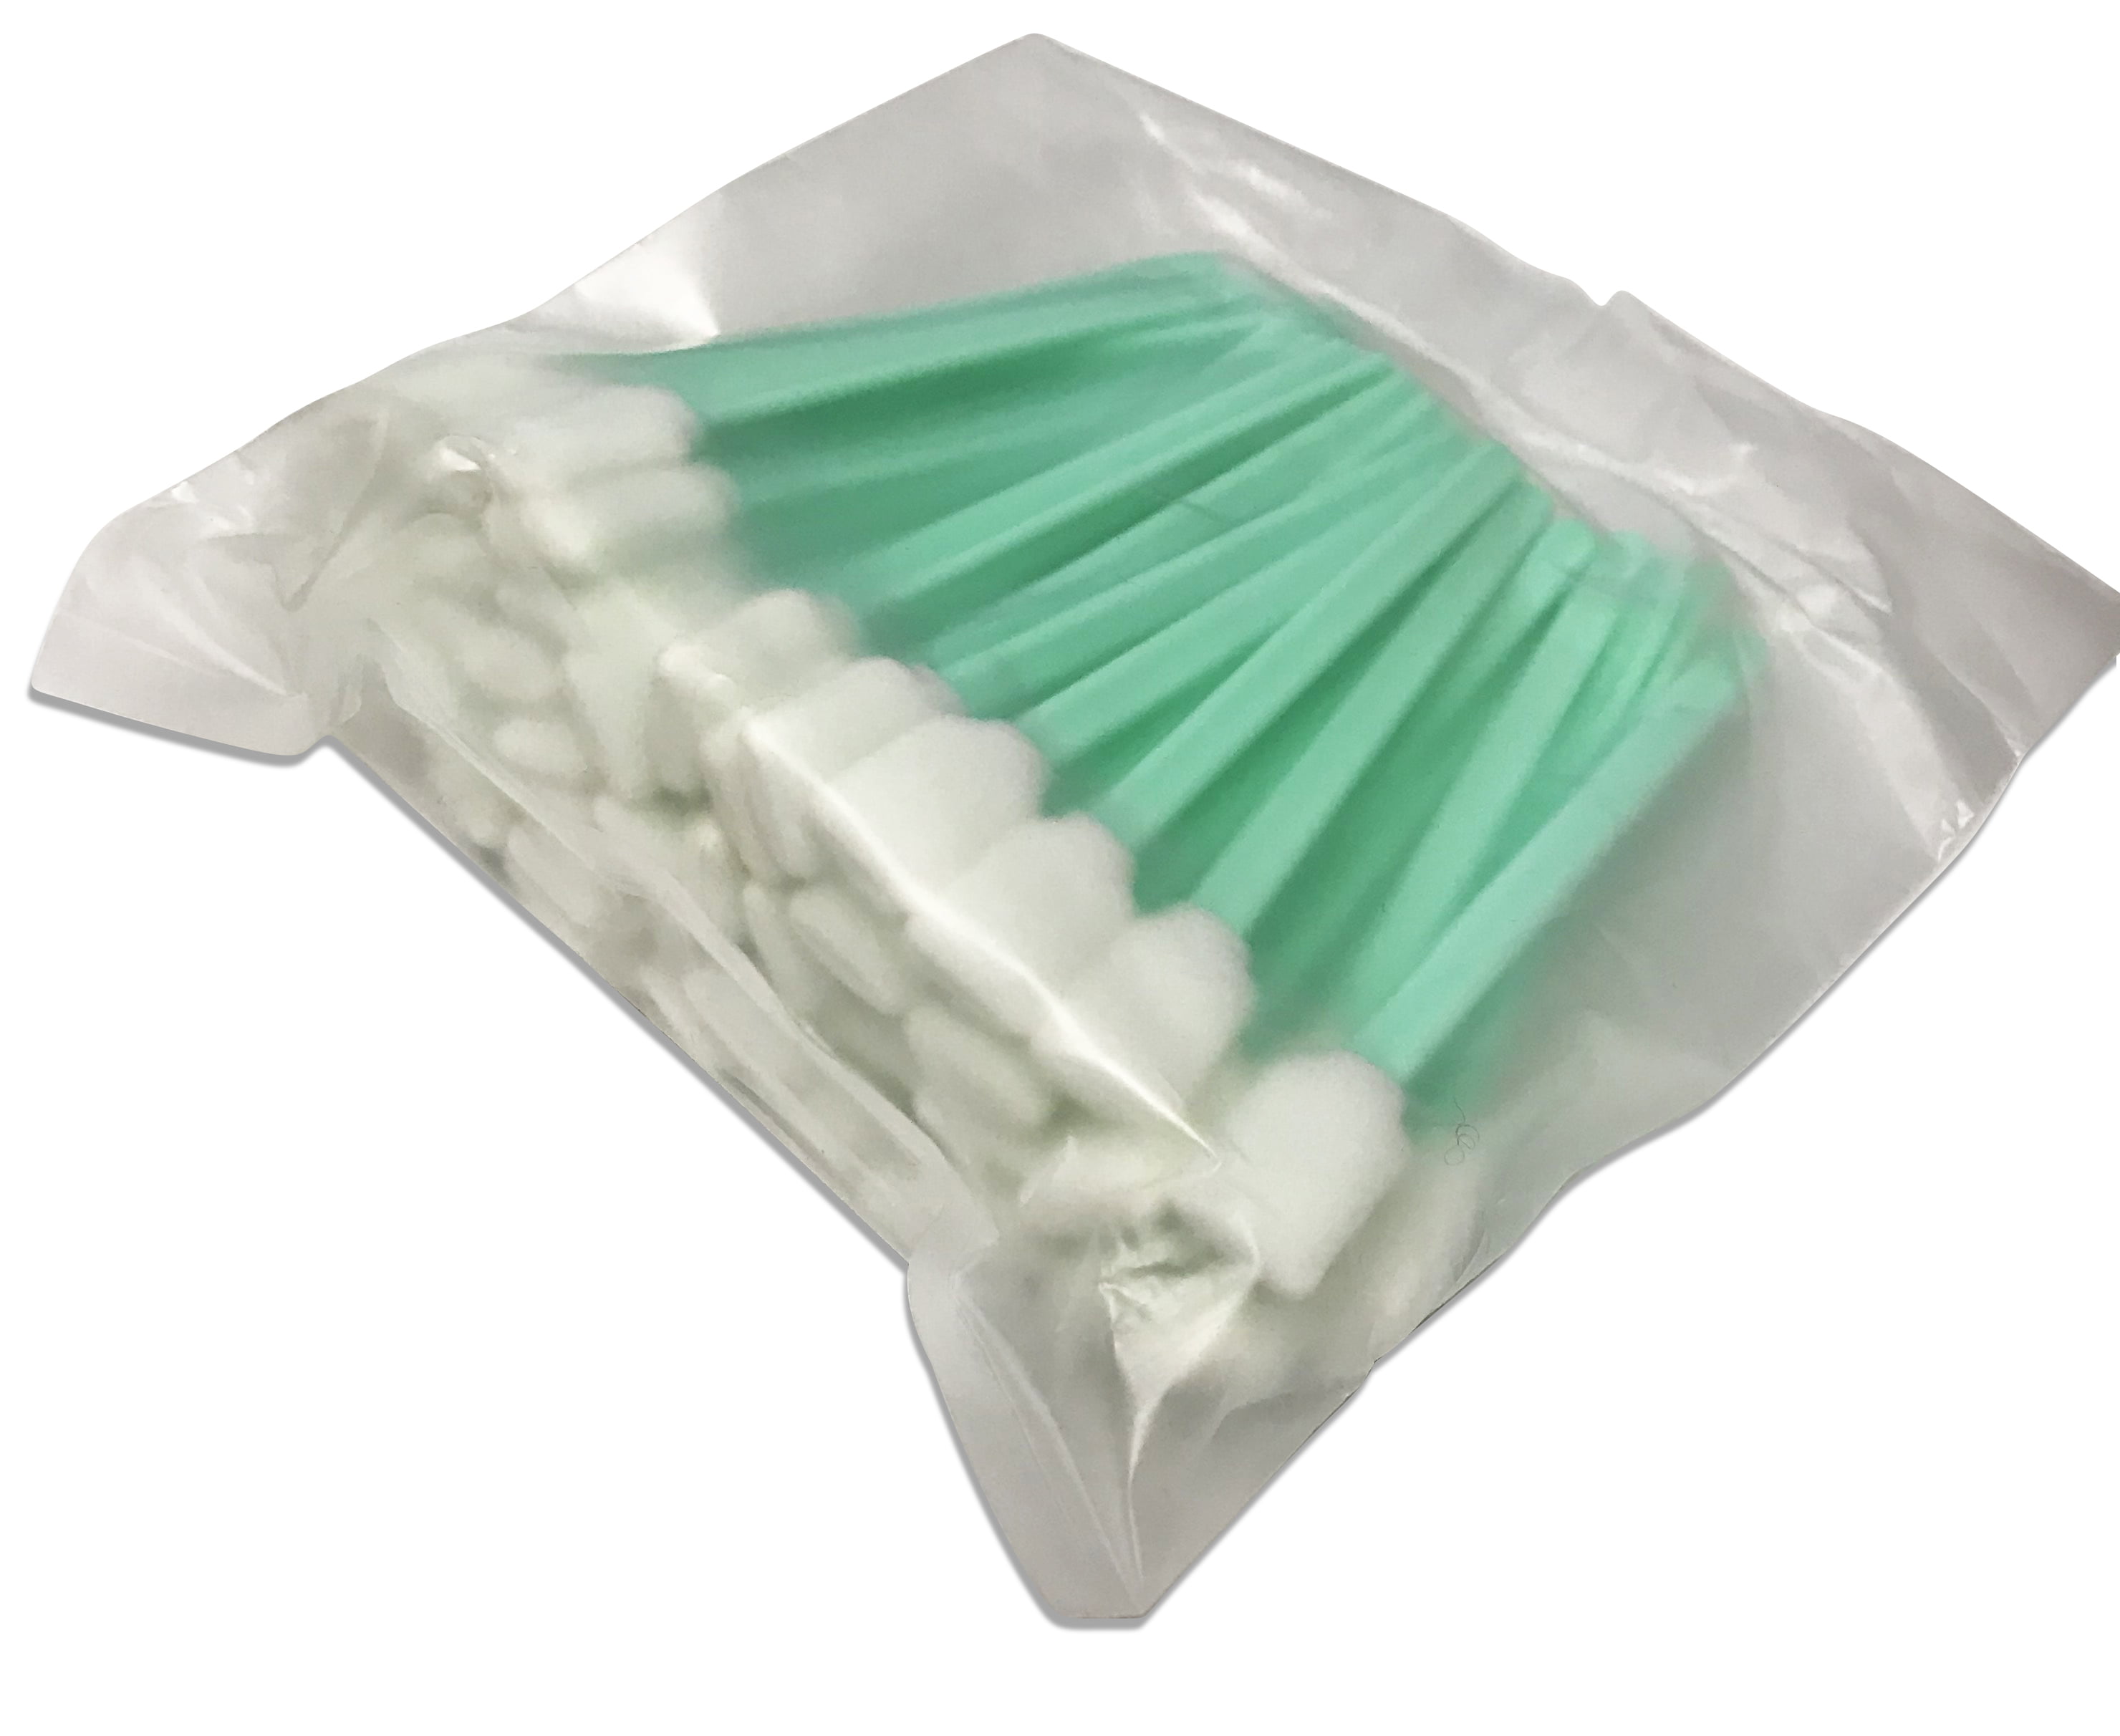 50xCloth Cleaning Swabs Sticks For Cleaning Printer Optical Laboratory Equips1 